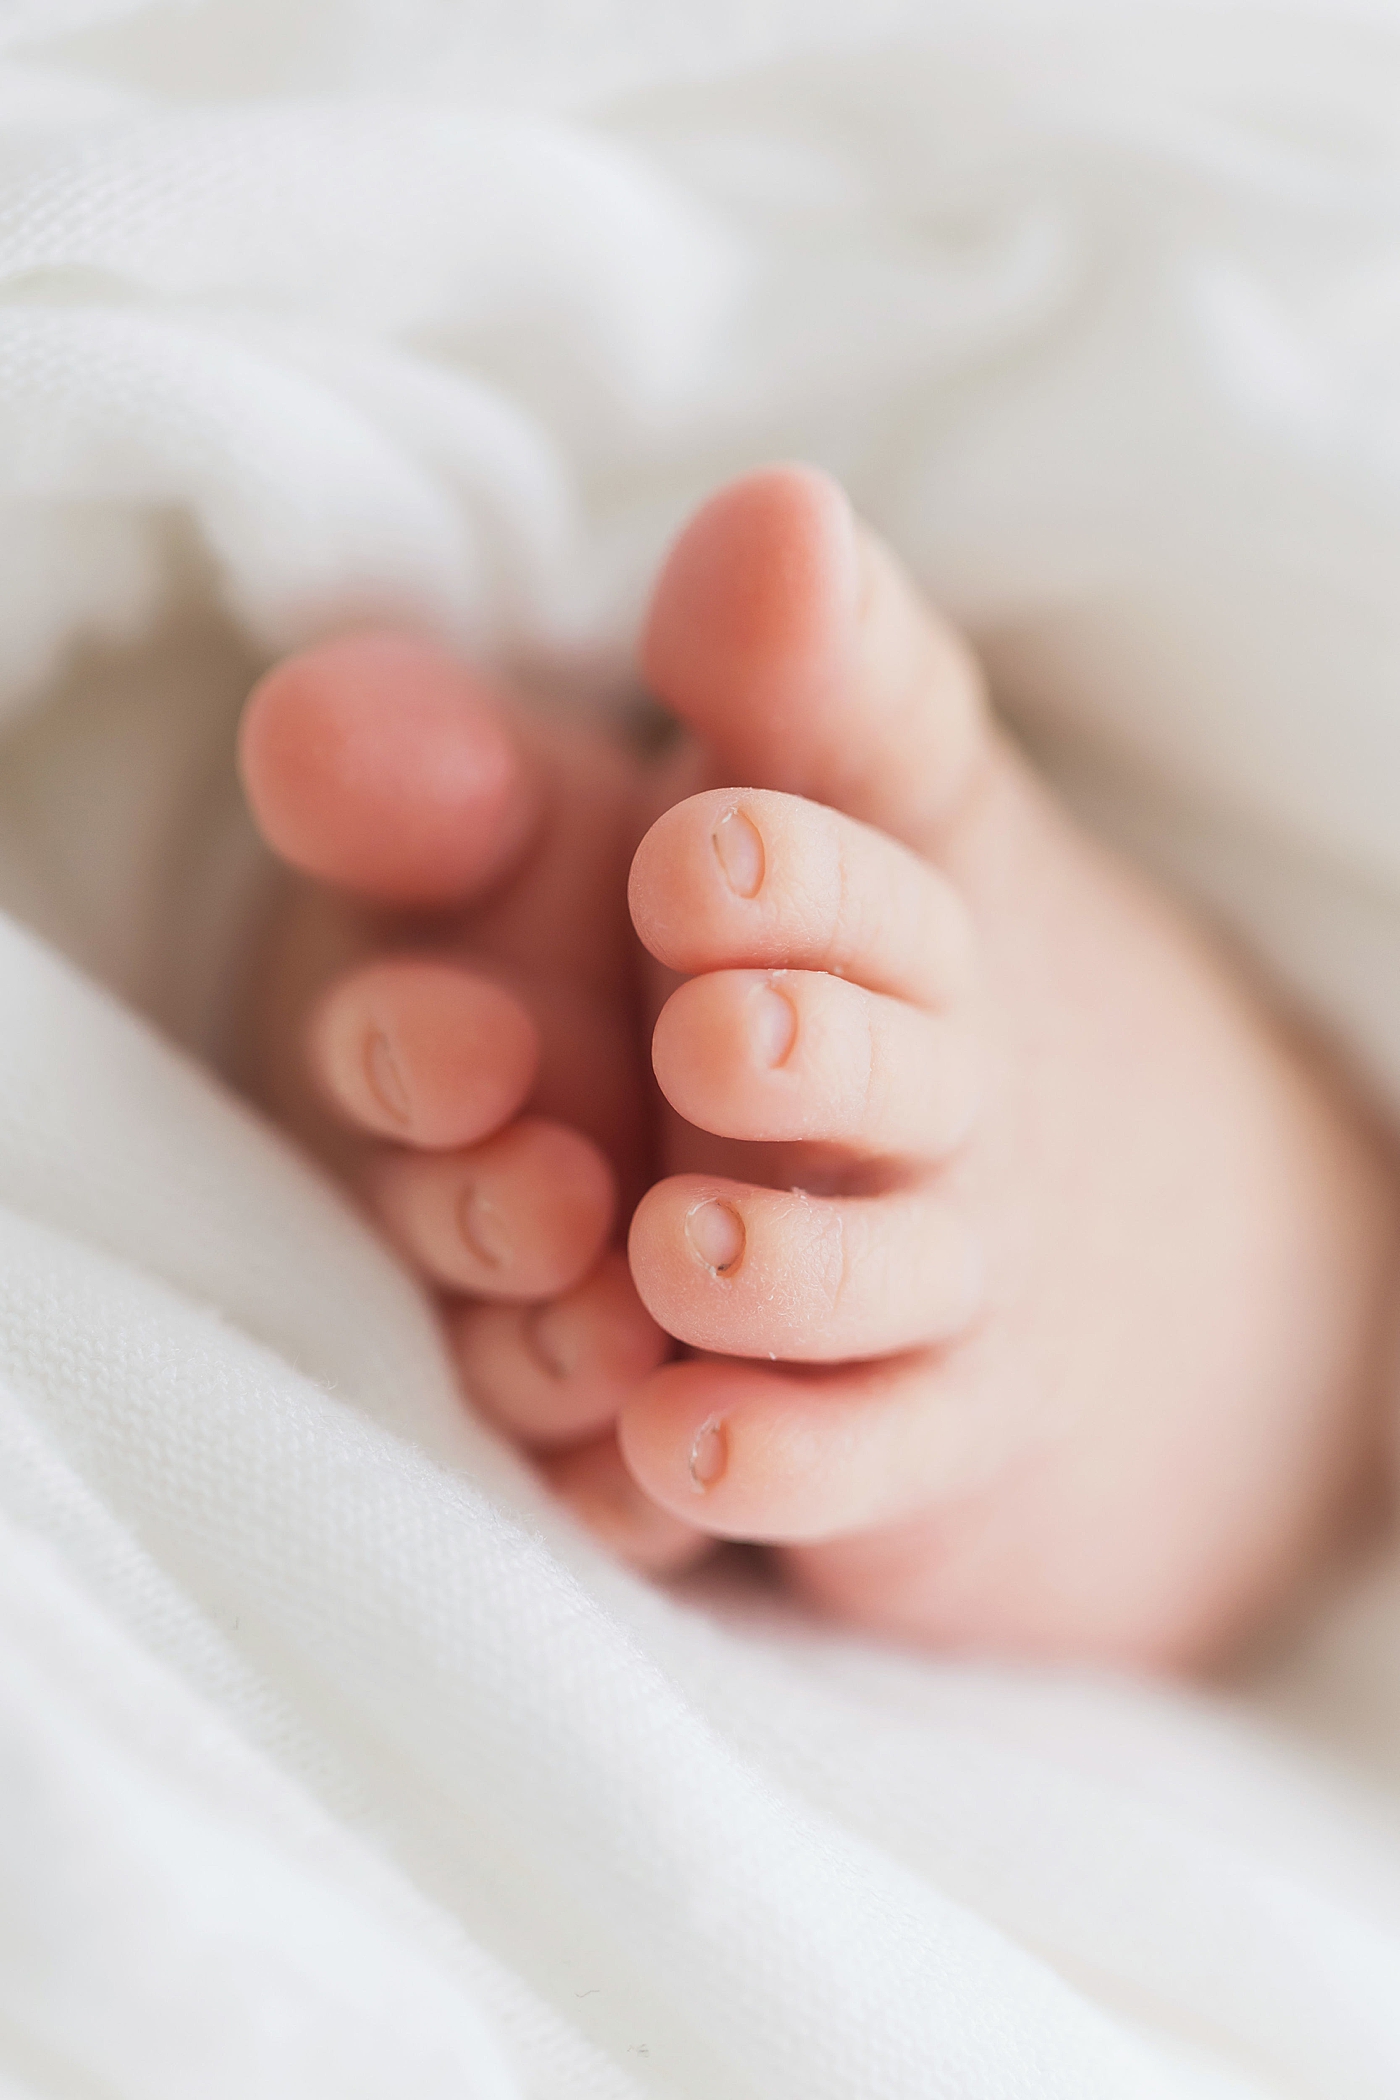 Details of newborn toes. Photo by Fresh Light Photography.